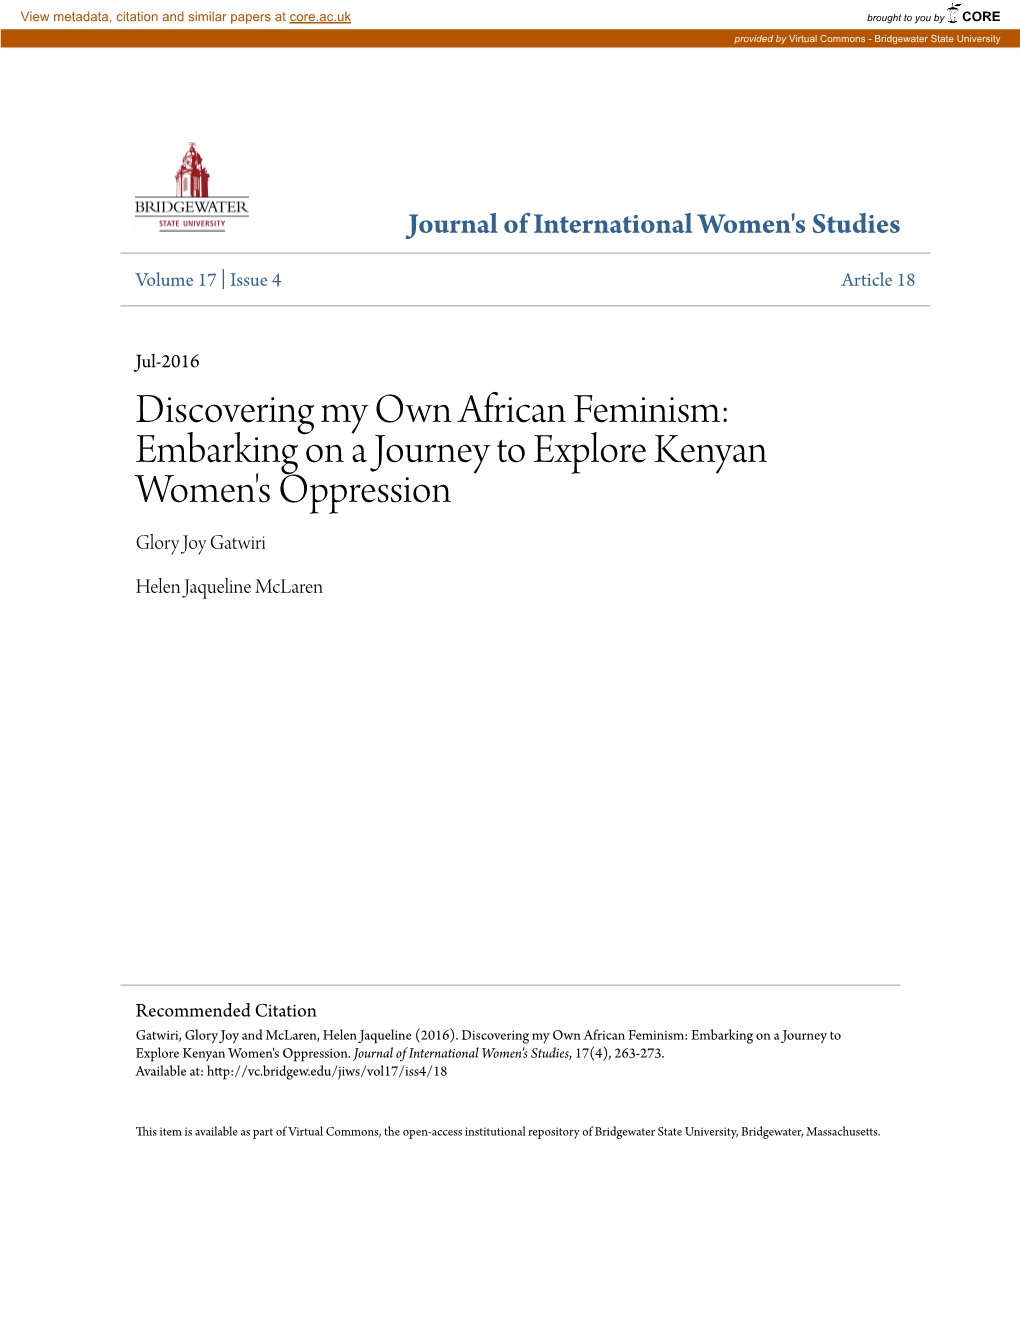 Discovering My Own African Feminism: Embarking on a Journey to Explore Kenyan Women's Oppression Glory Joy Gatwiri